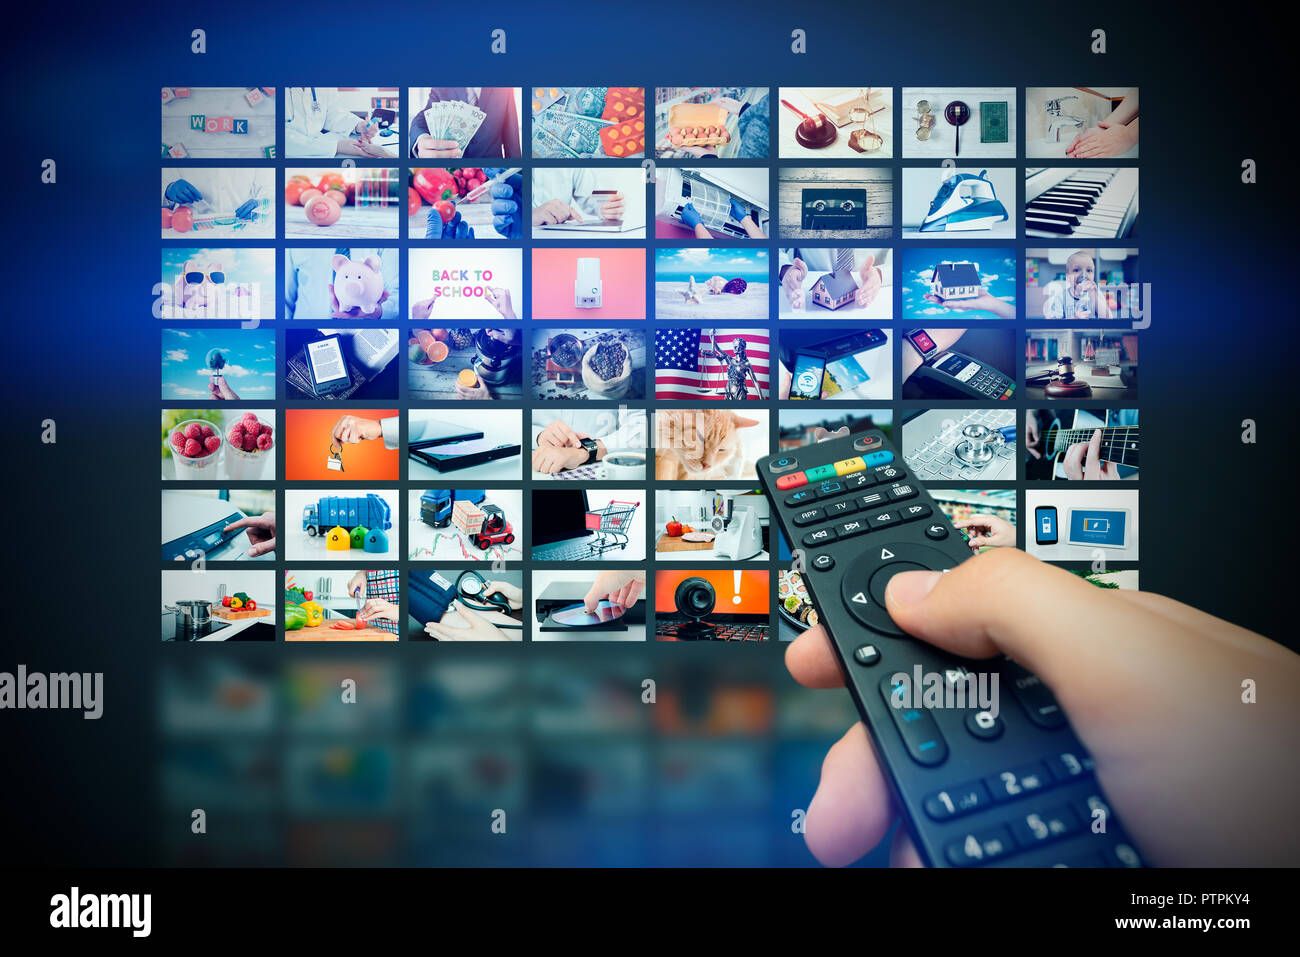 Multimedia video wall television broadcast. Hand holding remote control. Stock Photo